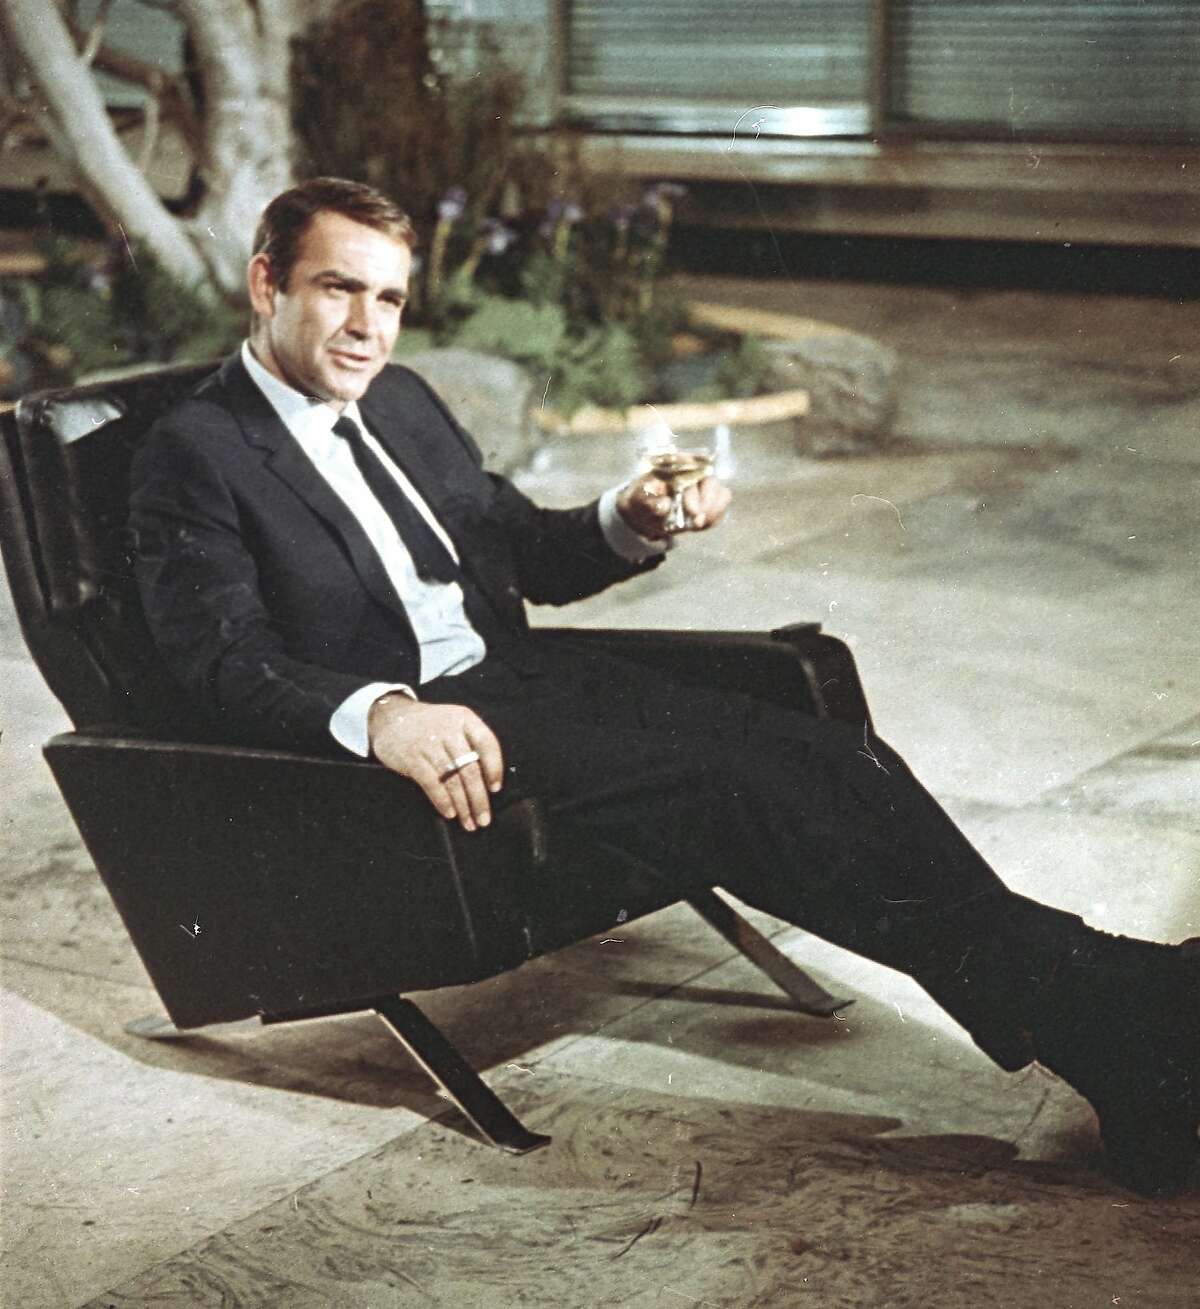 FILE - In this file photo dated July 29, 1966, actor Sean Connery is shown during filming the James Bond movie "You Only Live Twice," on location in Tokyo, Japan. Scottish actor Sean Connery, considered by many to have been the best James Bond, has died aged 90, according to an announcement from his family. (AP Photo, FILE)